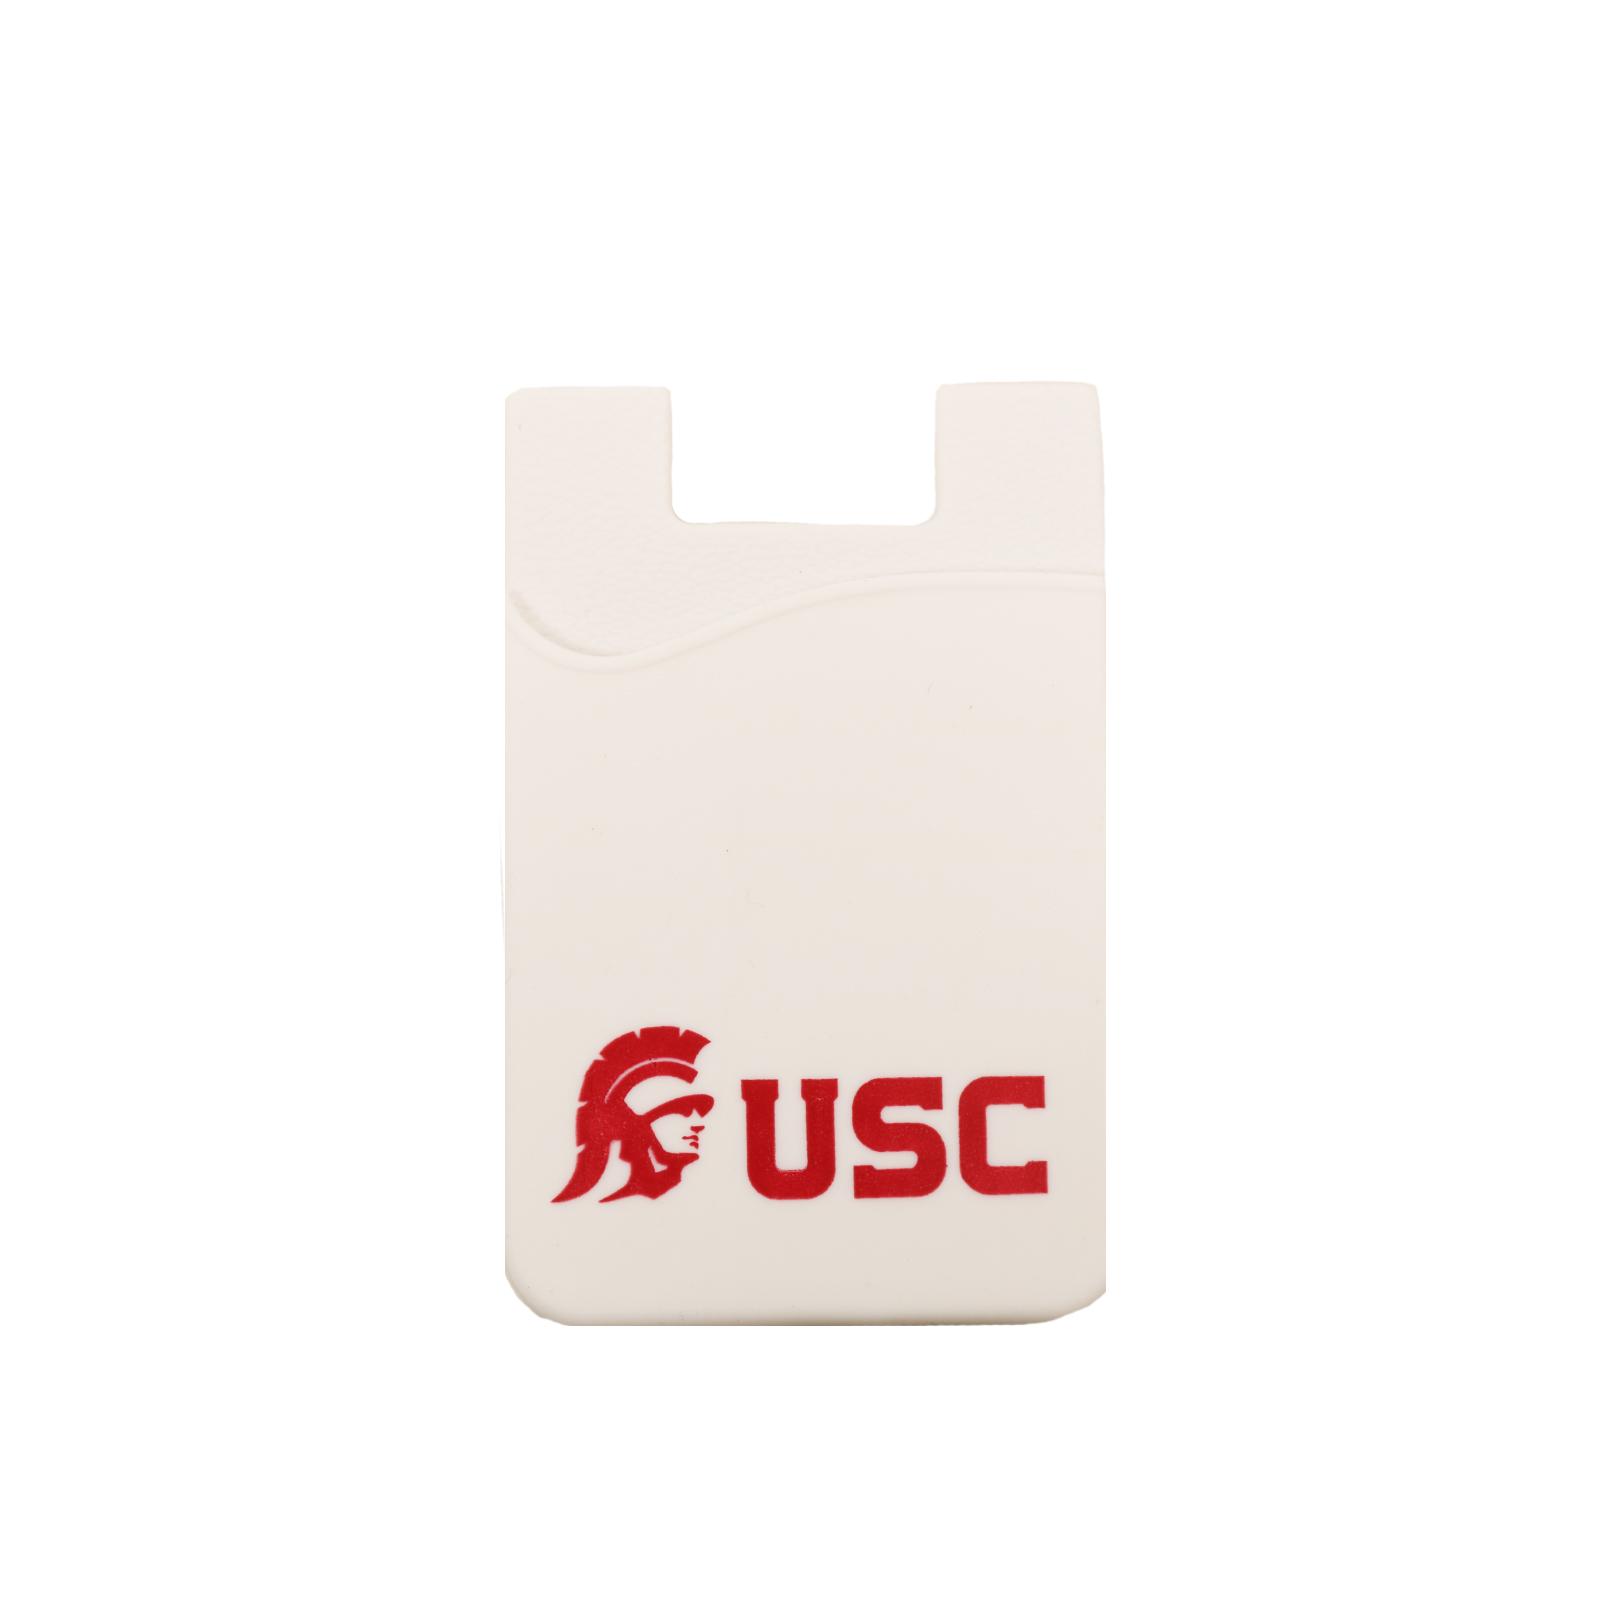 USC Small Trojan Head Silicone Cell Phone Pocket White image01